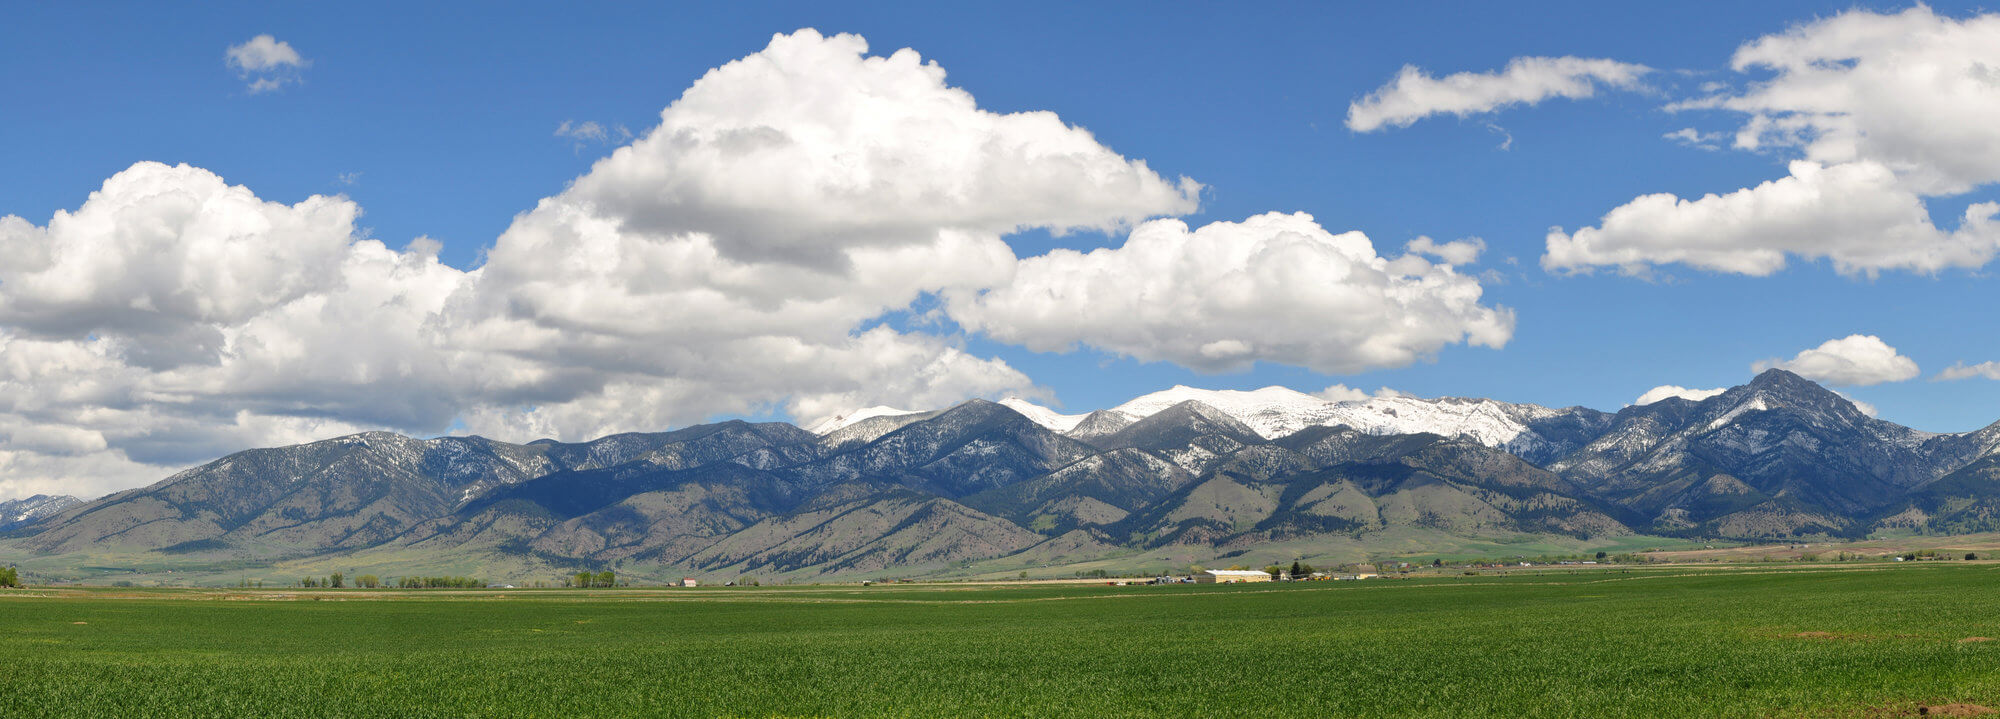 Gorgeous horizon view of the green fields and bright blue cloudy skies in Manhattan, Montana